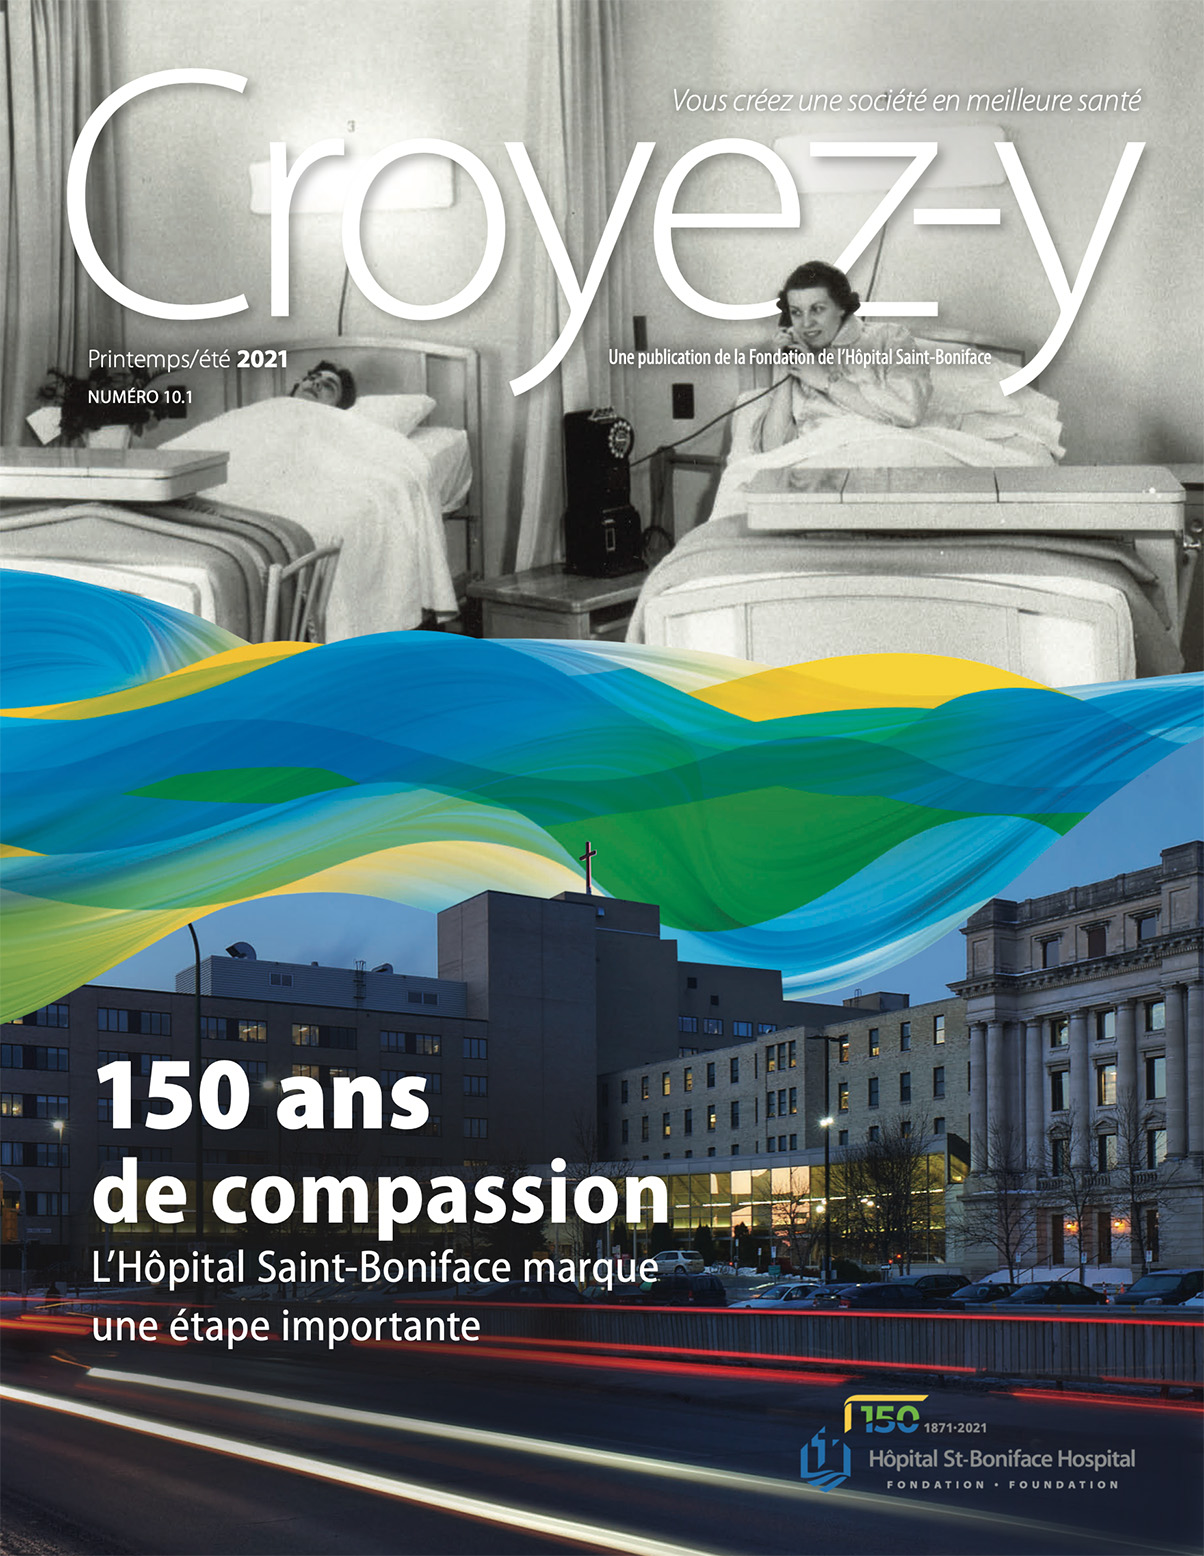 Before and after, 150 years of compassion in St-Boniface Hospital - Believe Magazine Cover